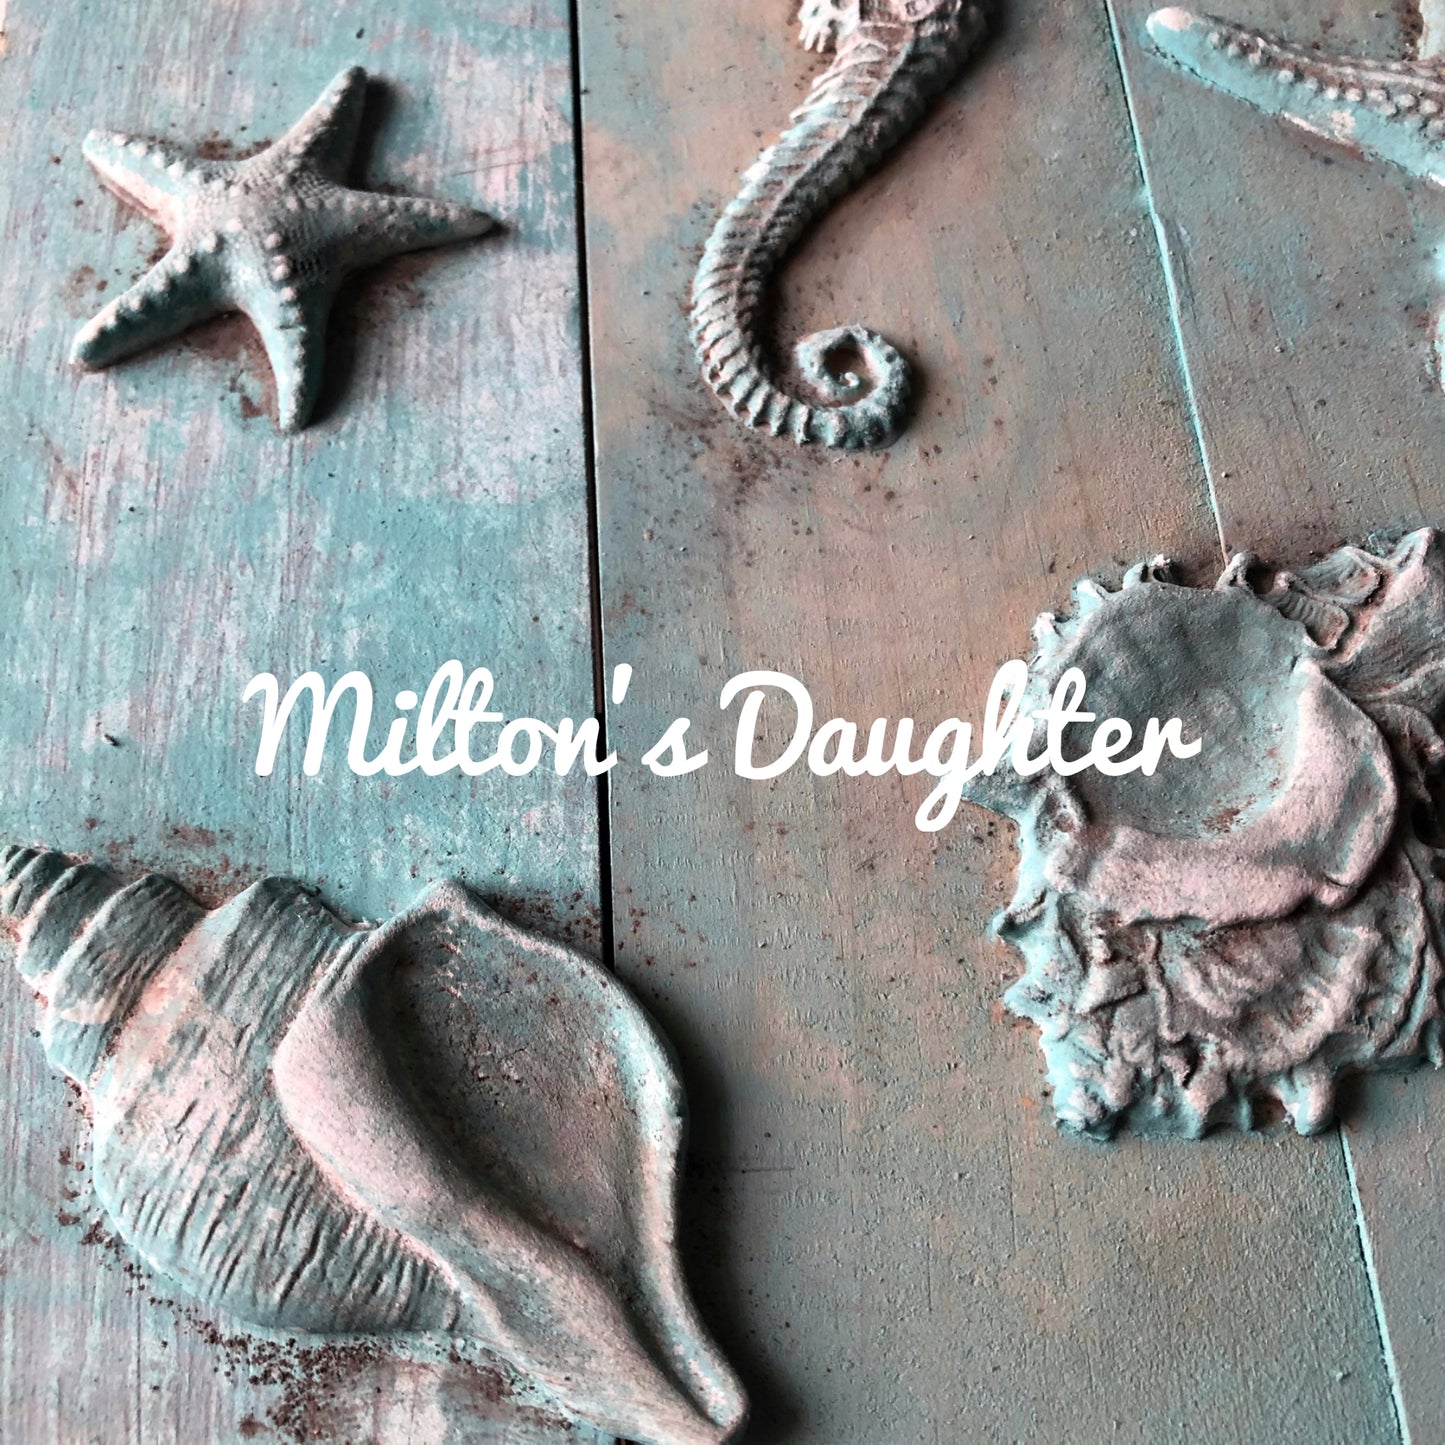 IOD Seashells Mold castings on wood, includes scallop, starfish, conch shell, oyster shell, sea horses at Milton's Daughter